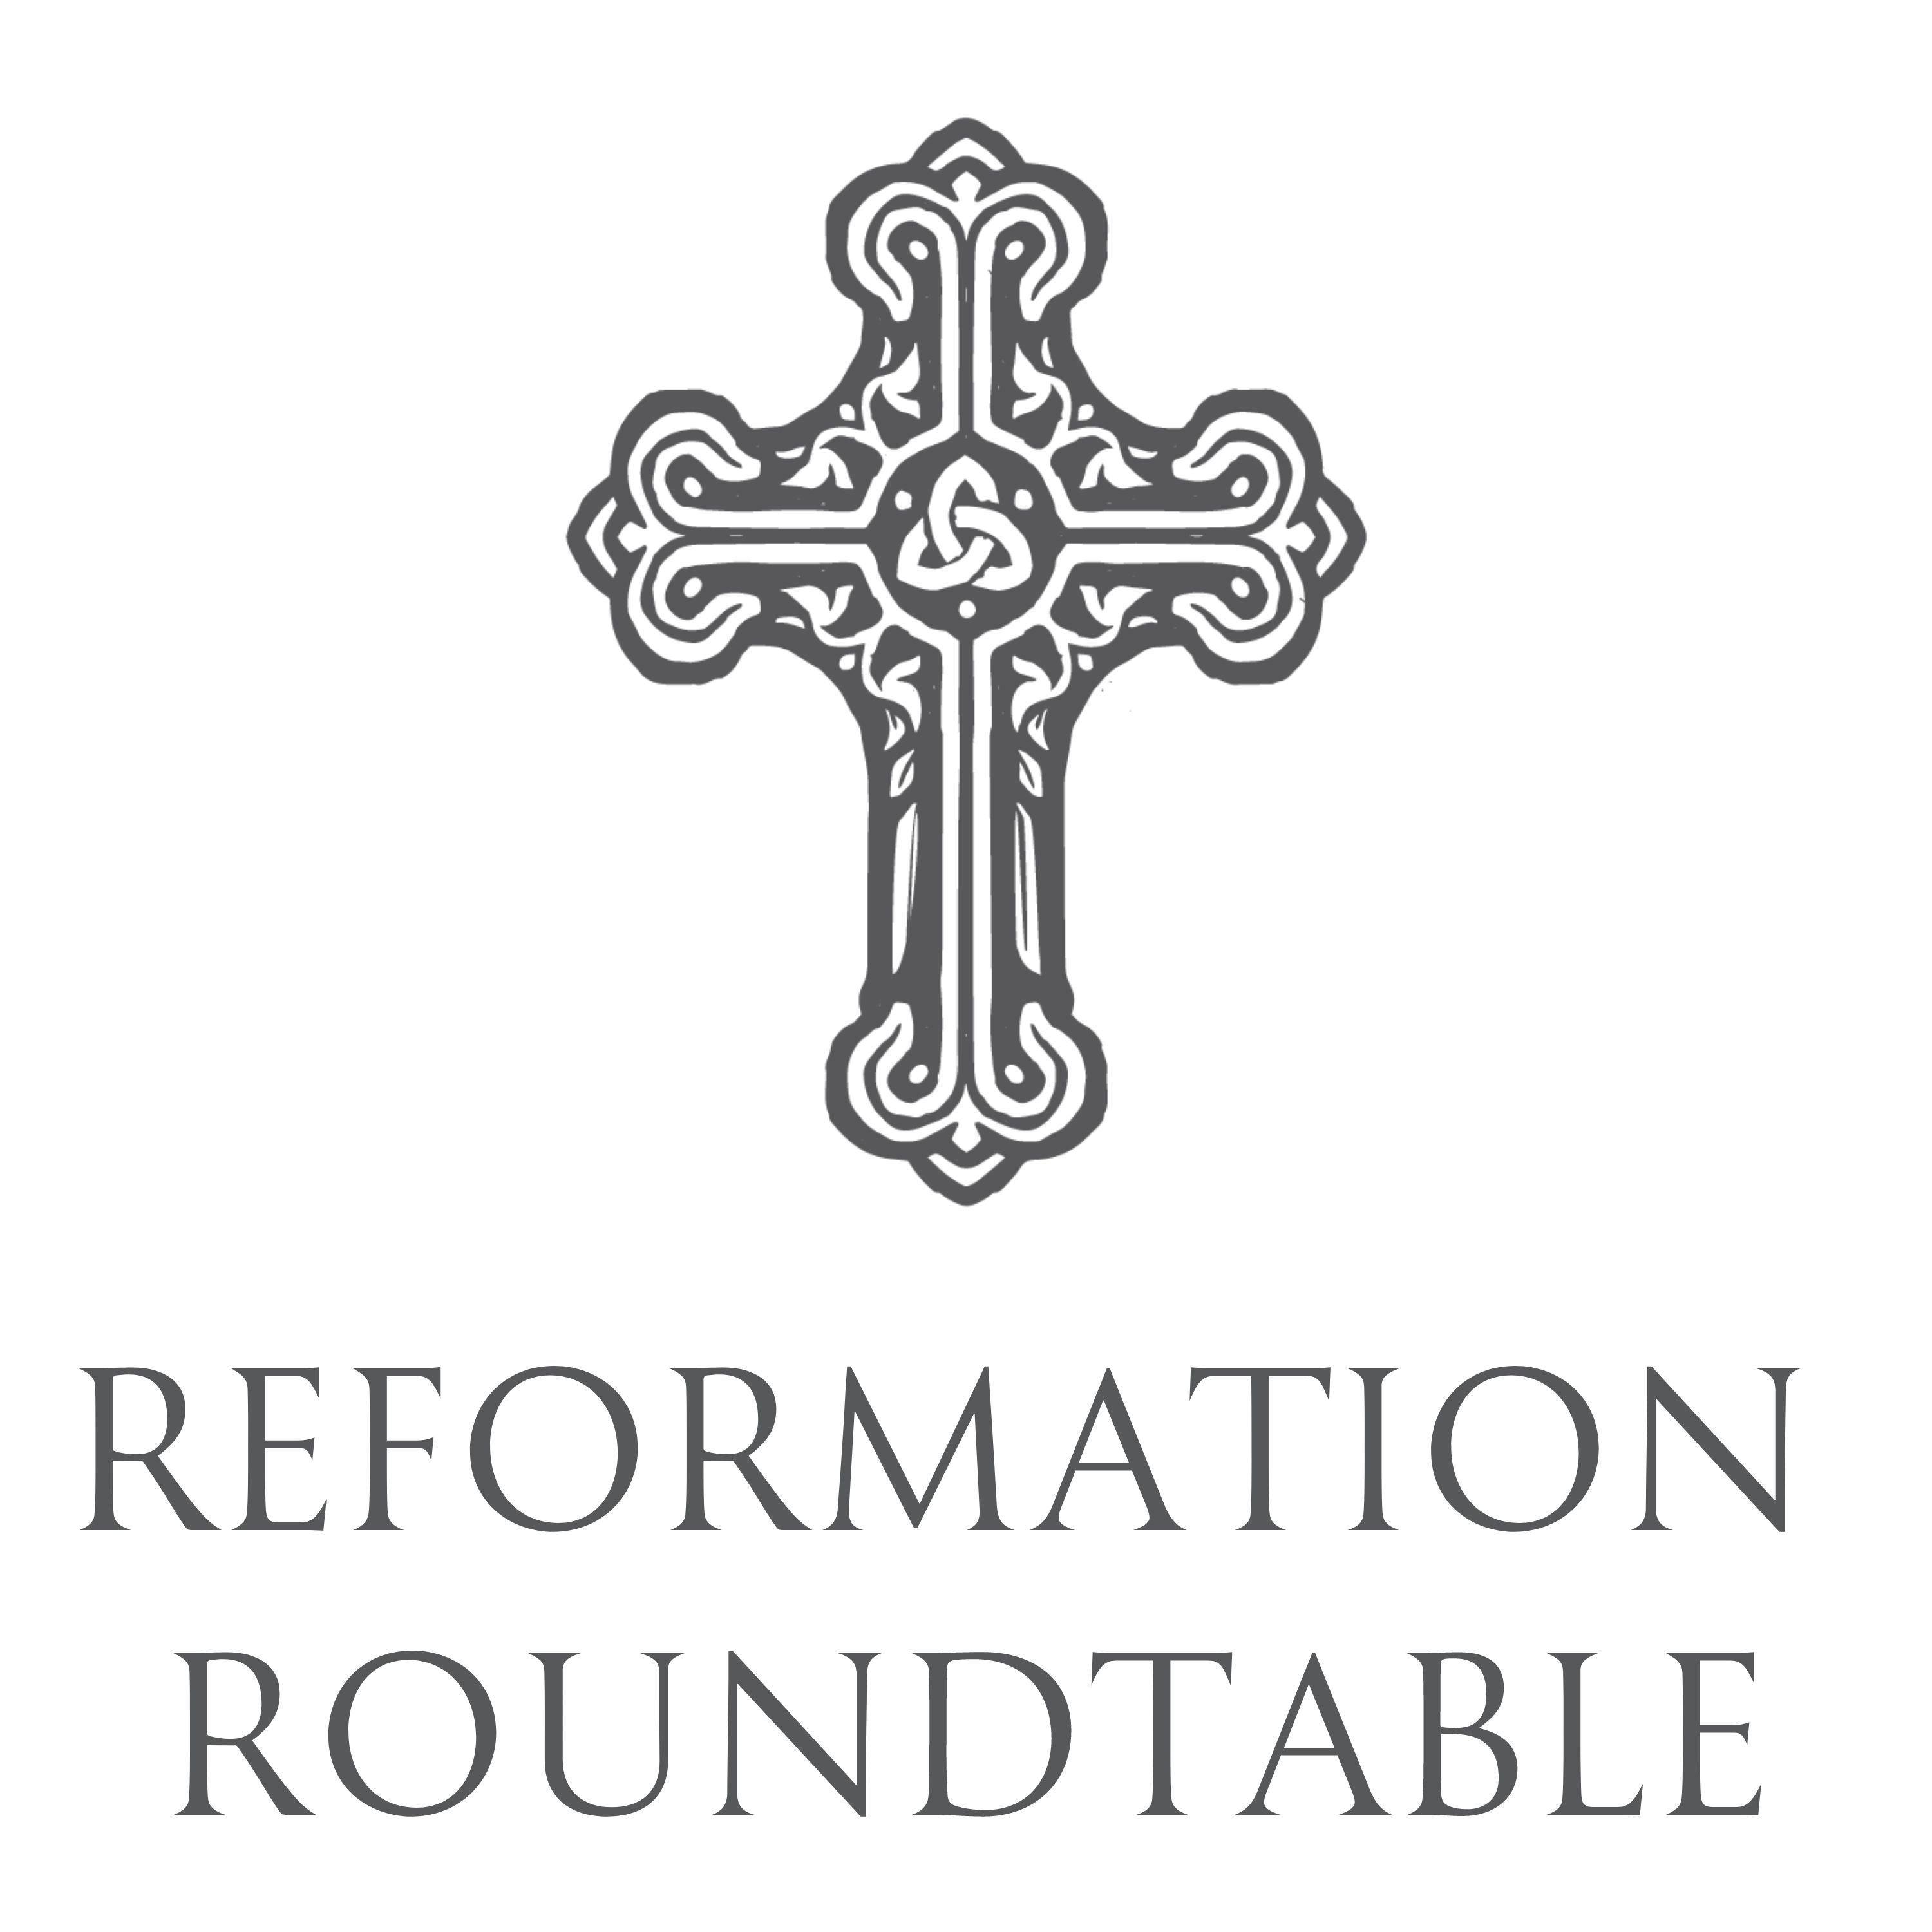 Reformation Roundtable